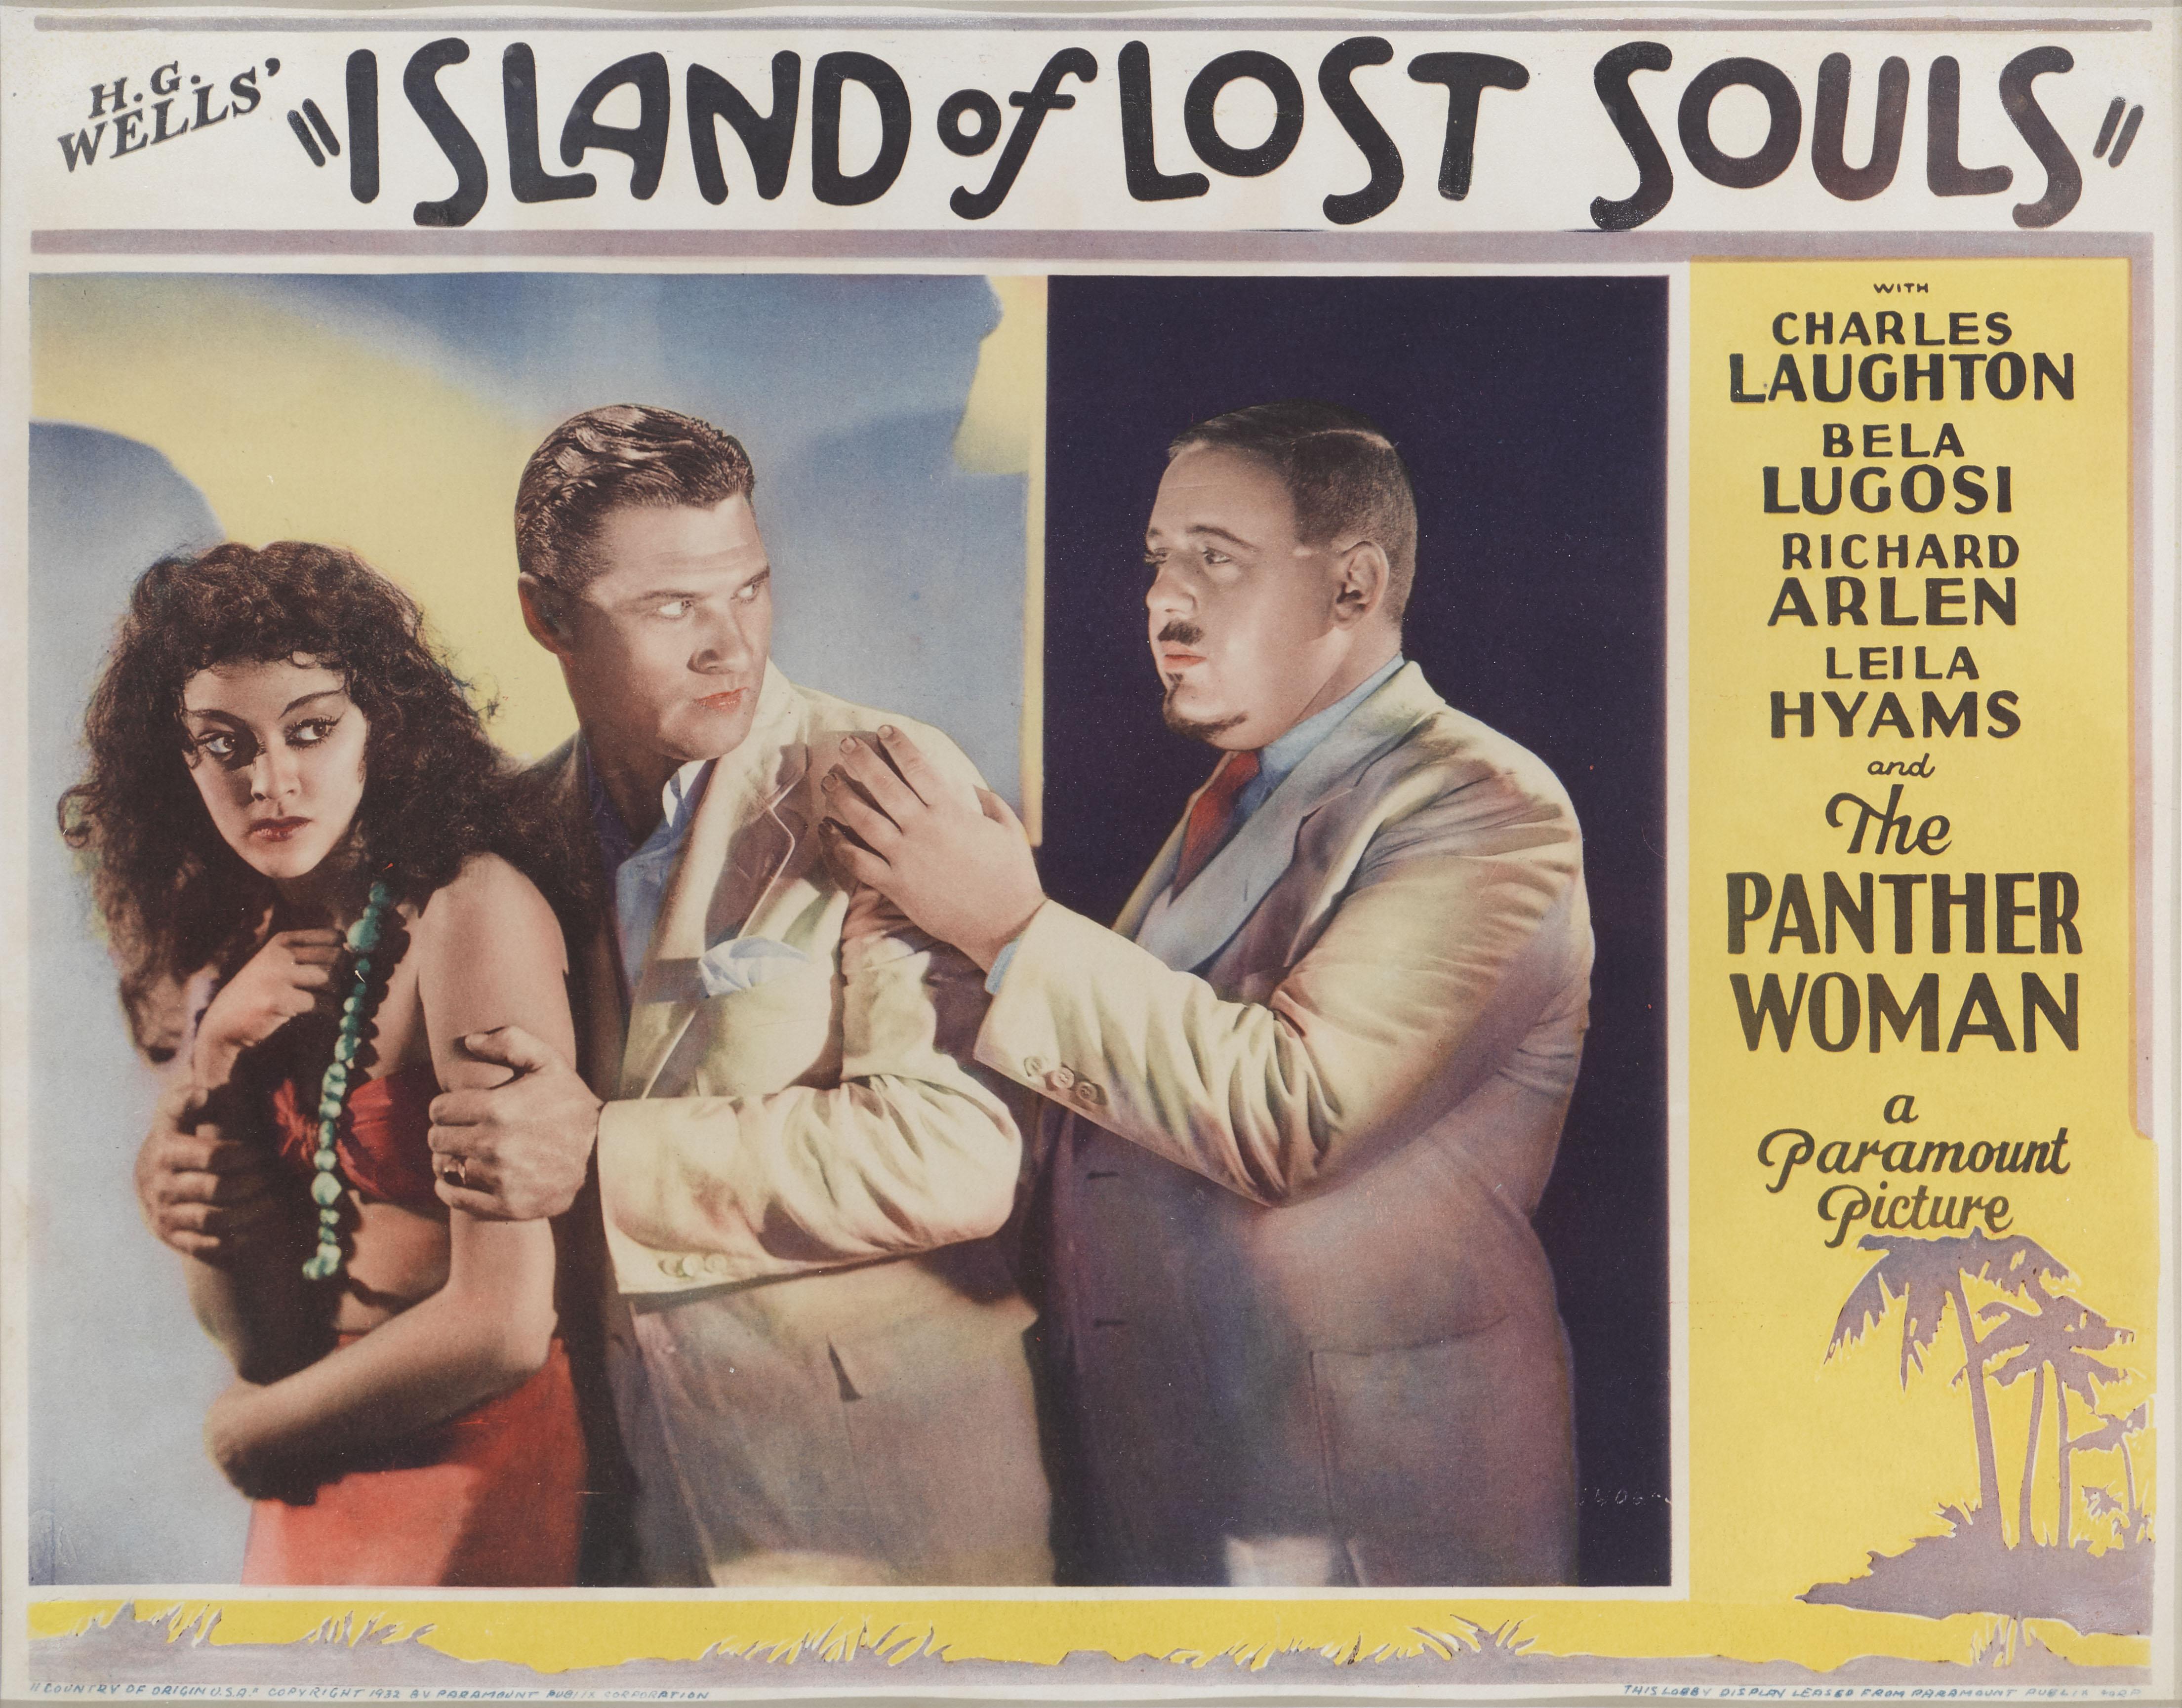 This is an extremely rare and highly desirable original US lobby card  for the 1932 Horror , Science Fiction film Island of Lost Souls.
This film starred Charles Laughton, Bela Lugosi and Richard Arlen.
The piece is conservation framed with UV